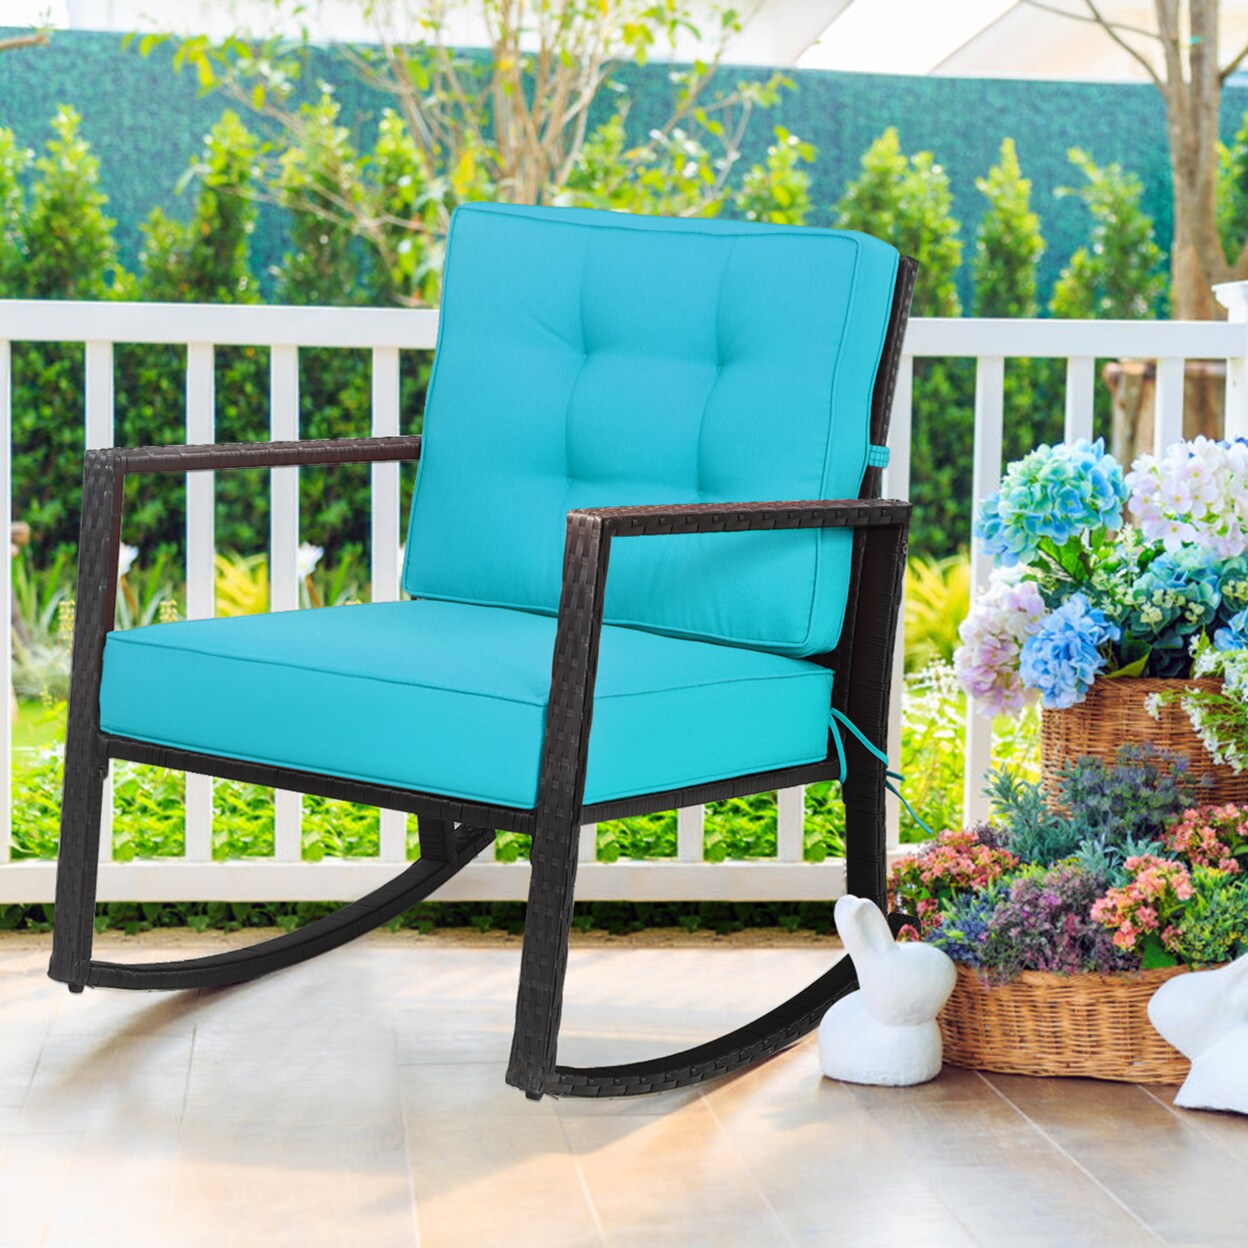 Gymax Outdoor Wicker Rocking Chair Patio Lawn Rattan Single Chair Glider w/ Turquoise Cushion